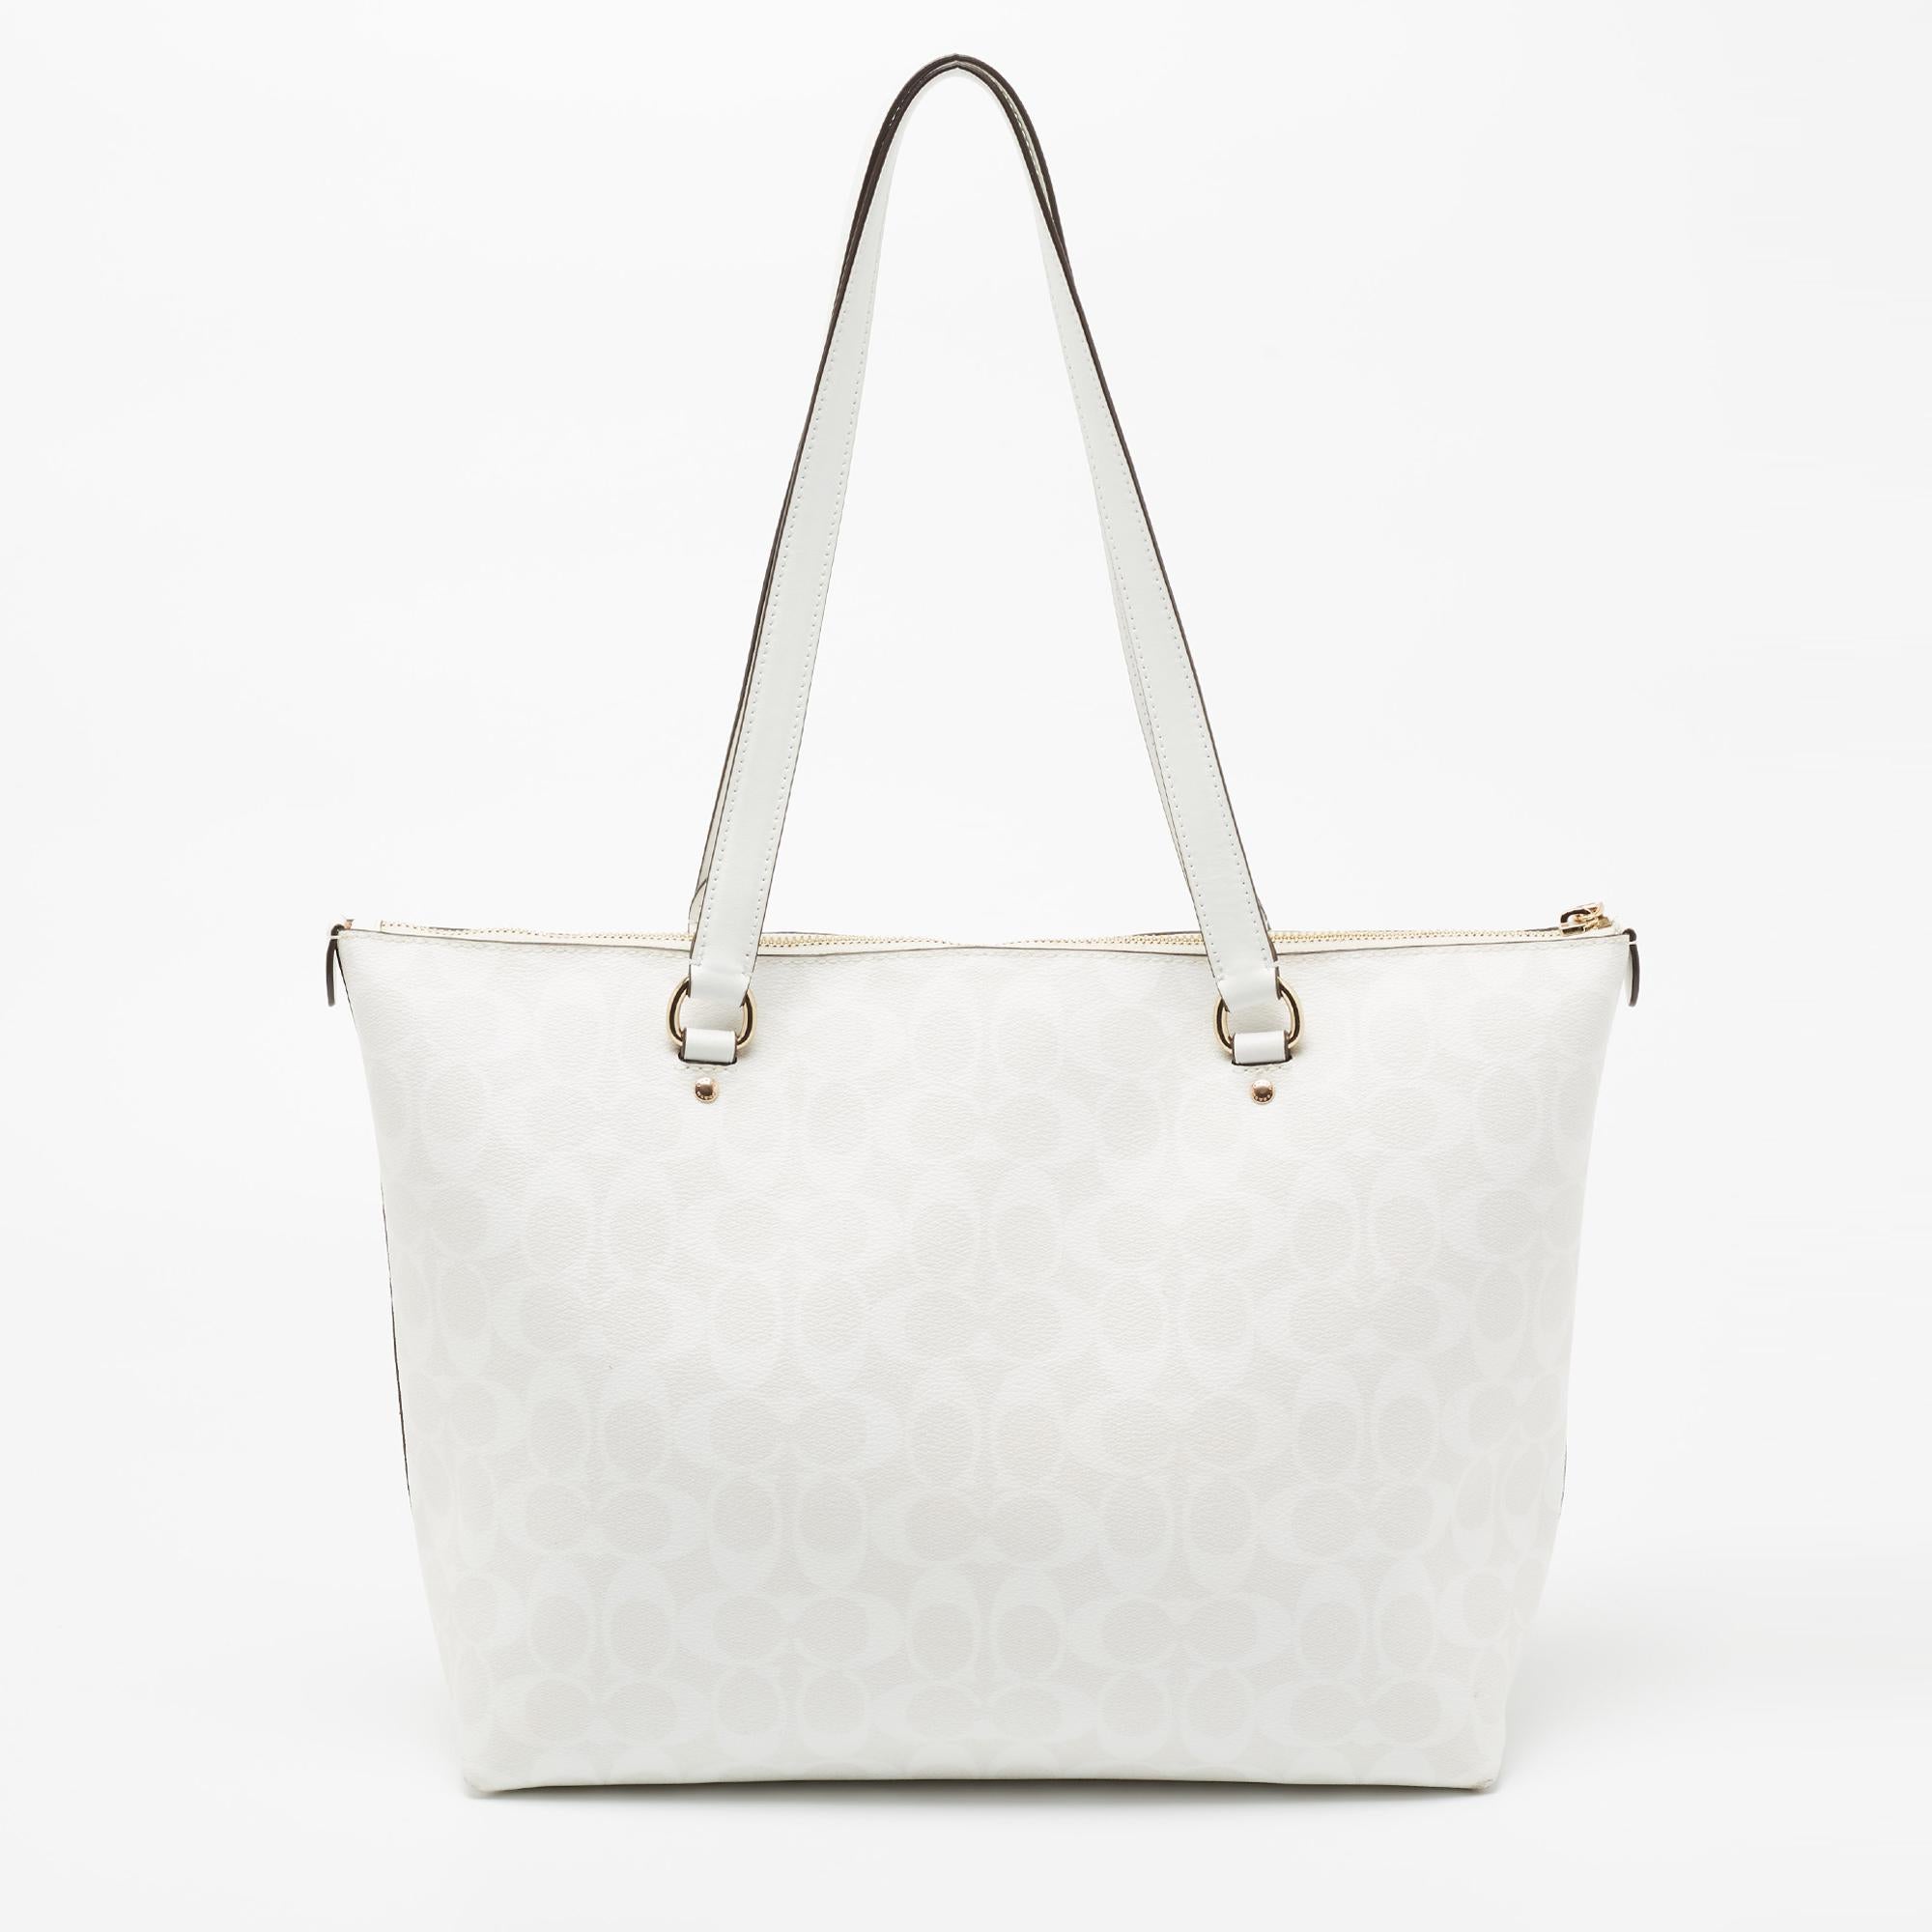 This designer tote from the House of Coach is super classy and functional, perfect for everyday use. It is made from signature coated canvas and leather with a gold-toned logo accent and zip pocket adorning the front. It has two shoulder